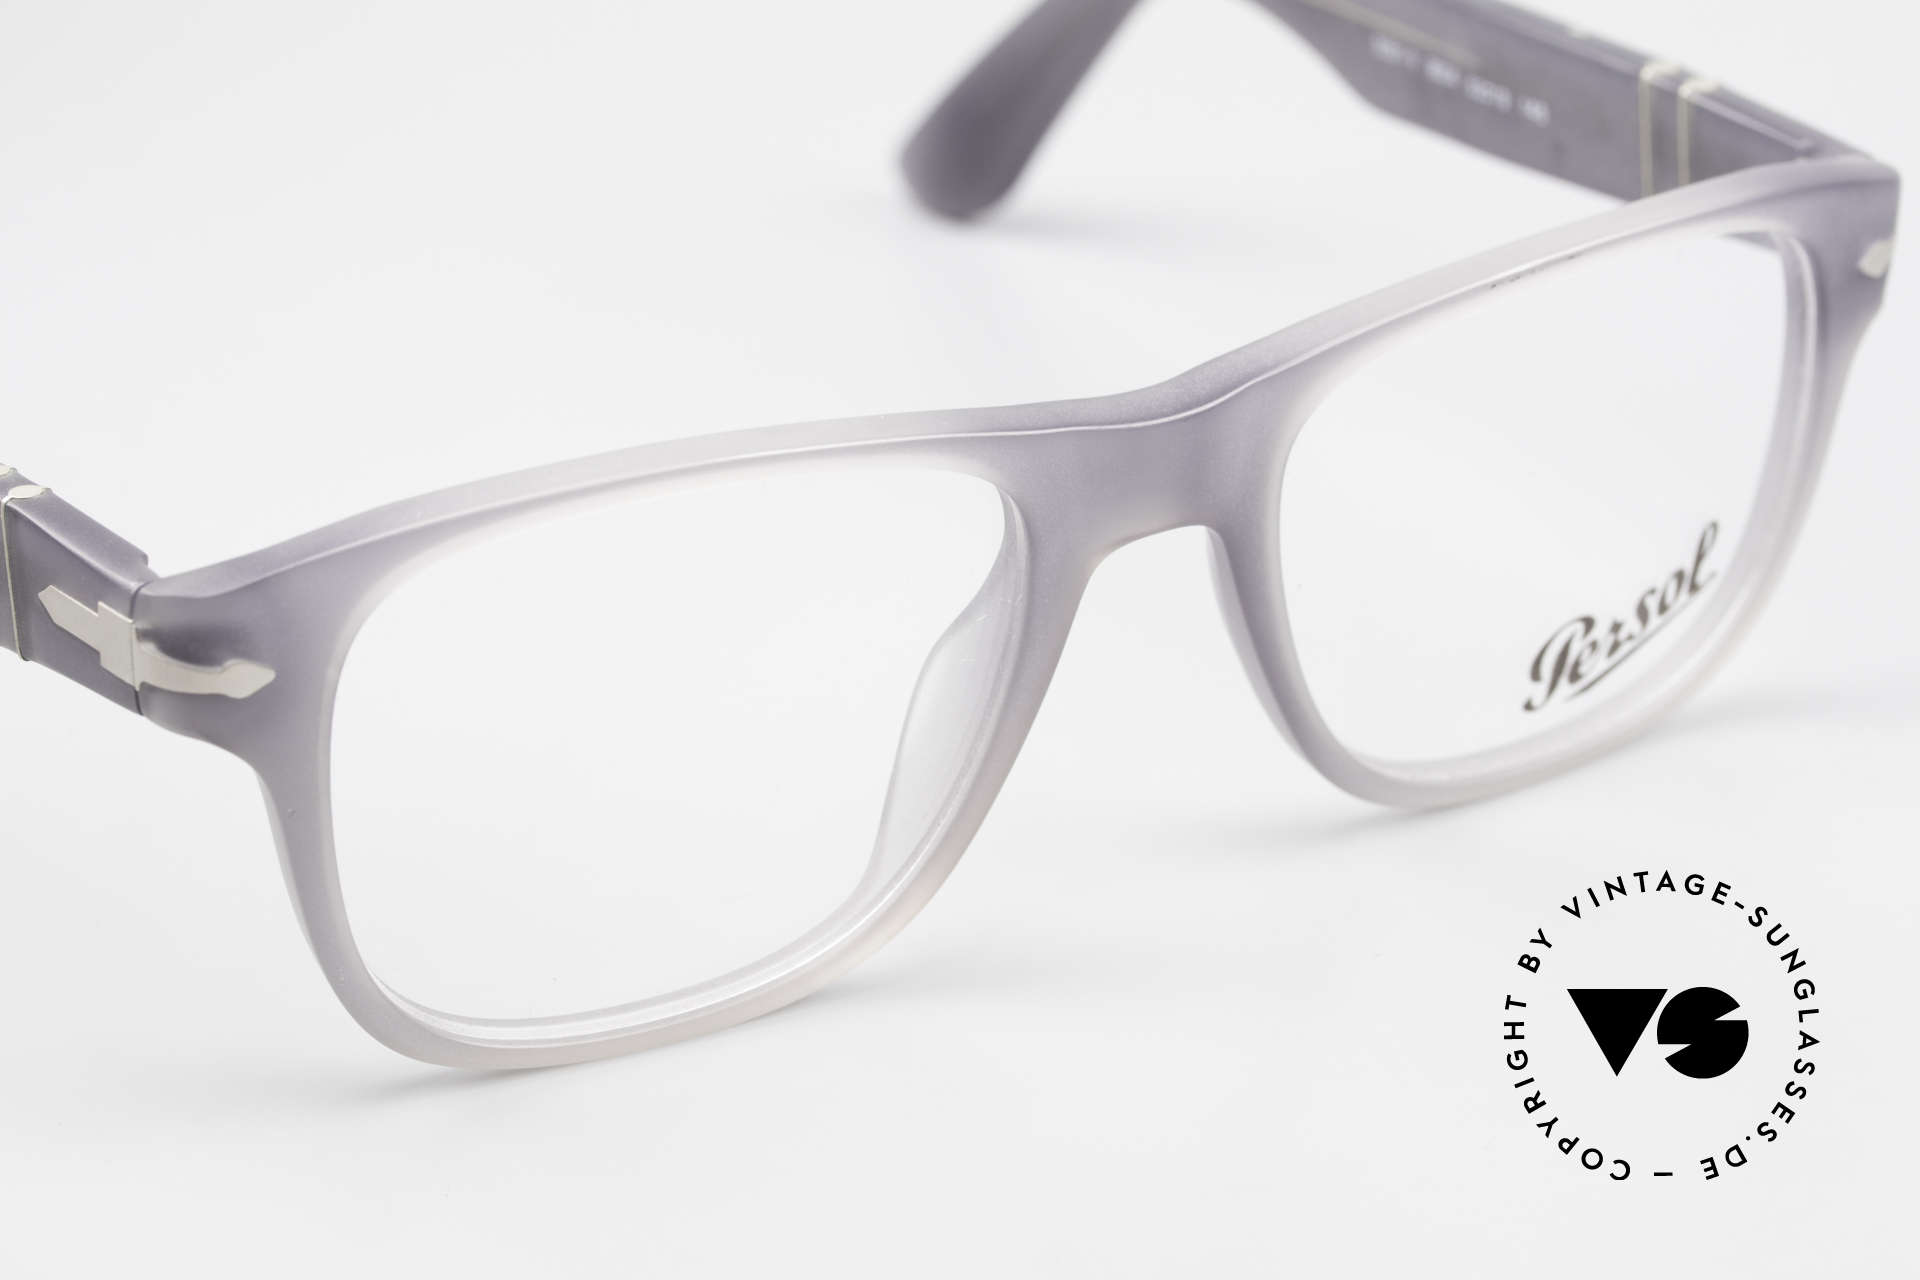 Persol 3051 Timeless Designer Frame Unisex, thus, we decided to take it into our vintage collection, Made for Men and Women